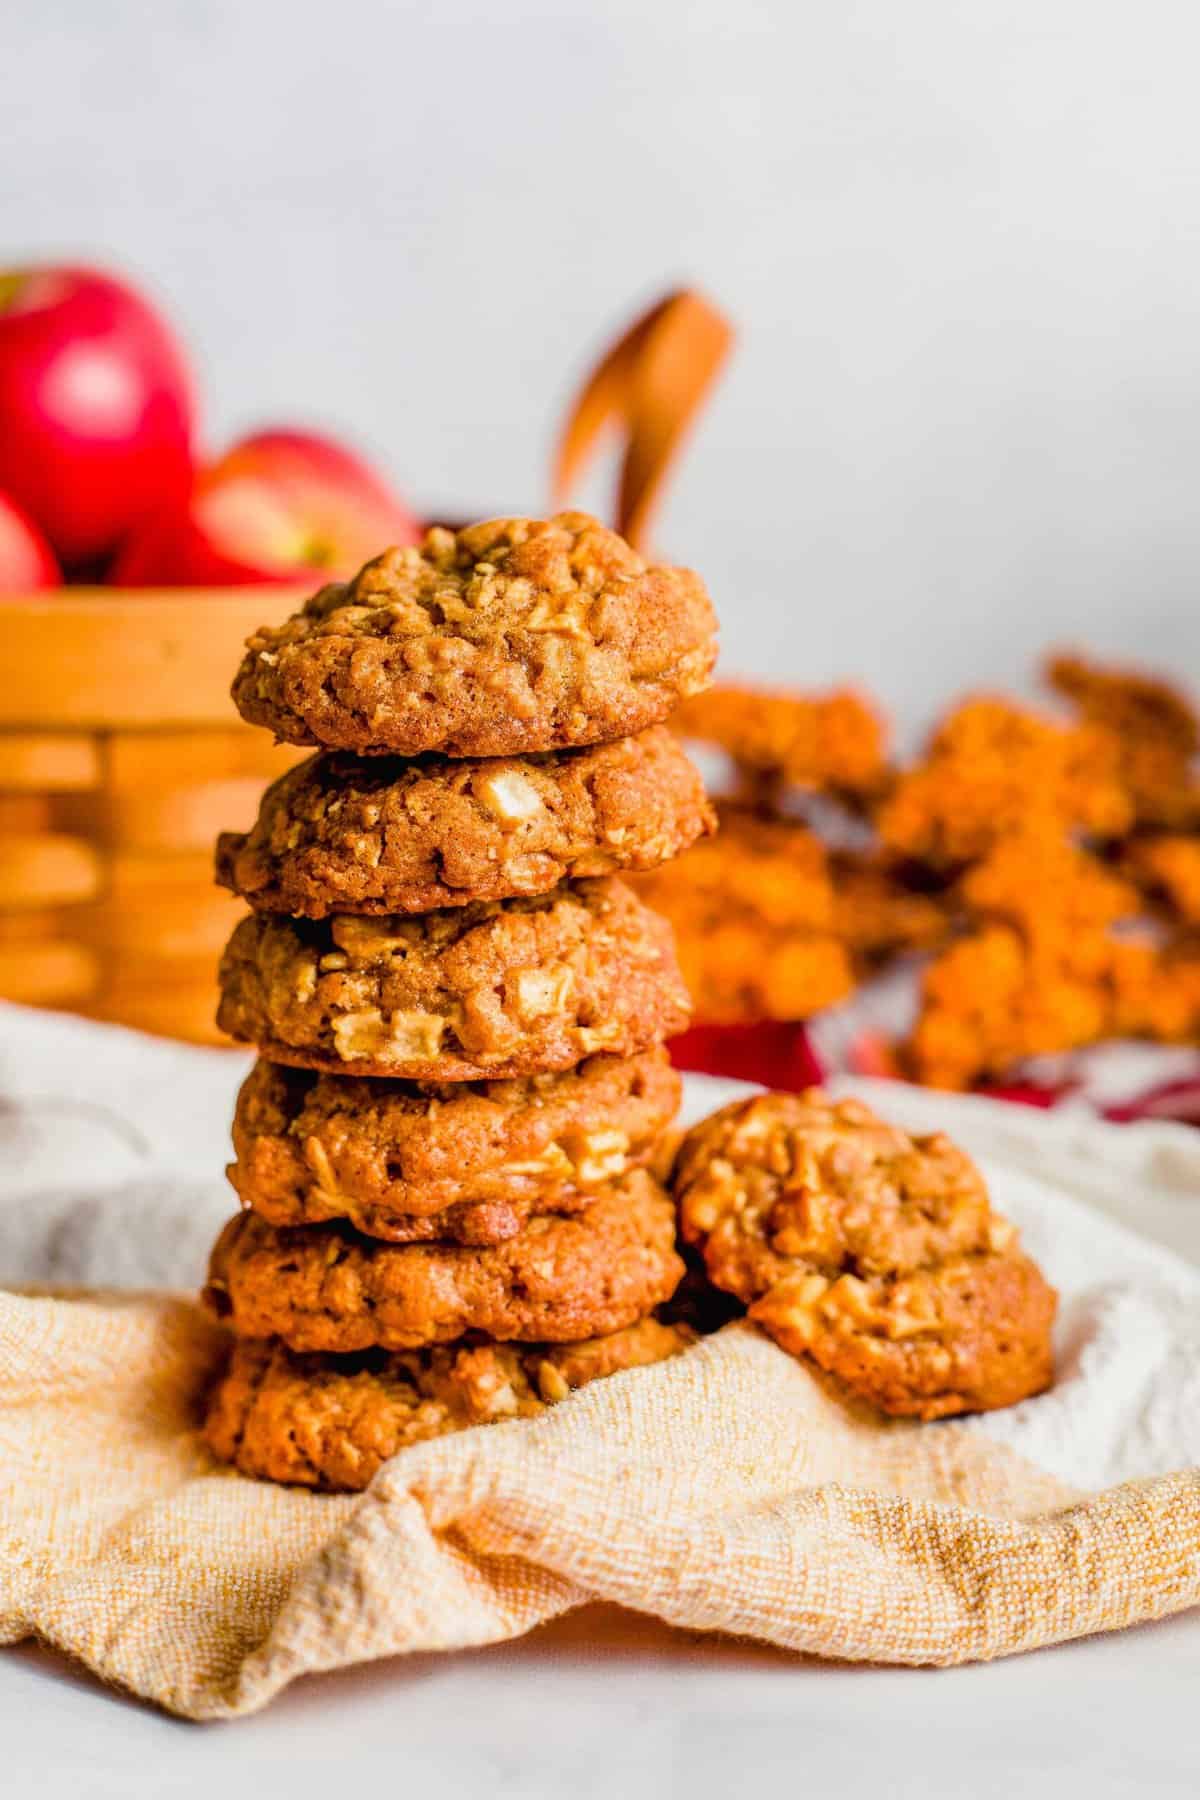 Six apple crisp cookies are stacked with a basket of whole apples in the background.